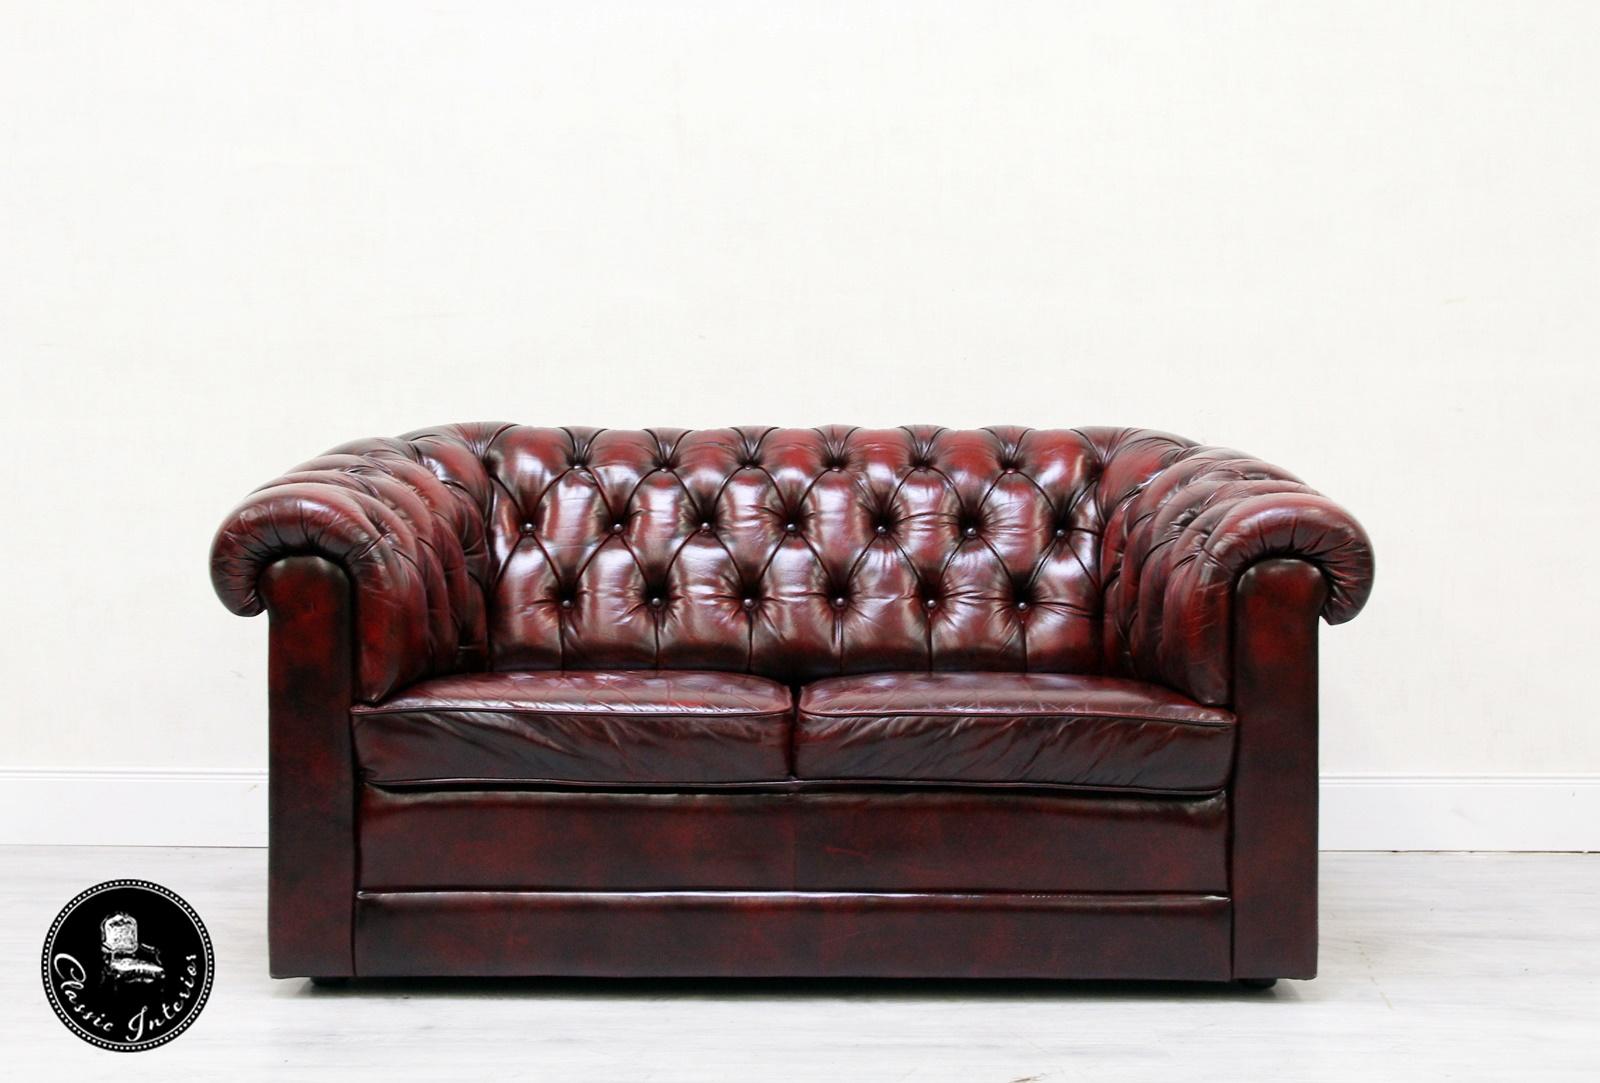 Chesterfield threesome, two-seat sofa and TV armchair
The shape is Classic
armchair
Dimensions: Height x 98 cm width x 100 cm depth x 100cm extended x 170 cm
2-seat sofa
Height x 78 cm length x 155 cm depth x 90 cm
3-seat sofa
Height x 78cm